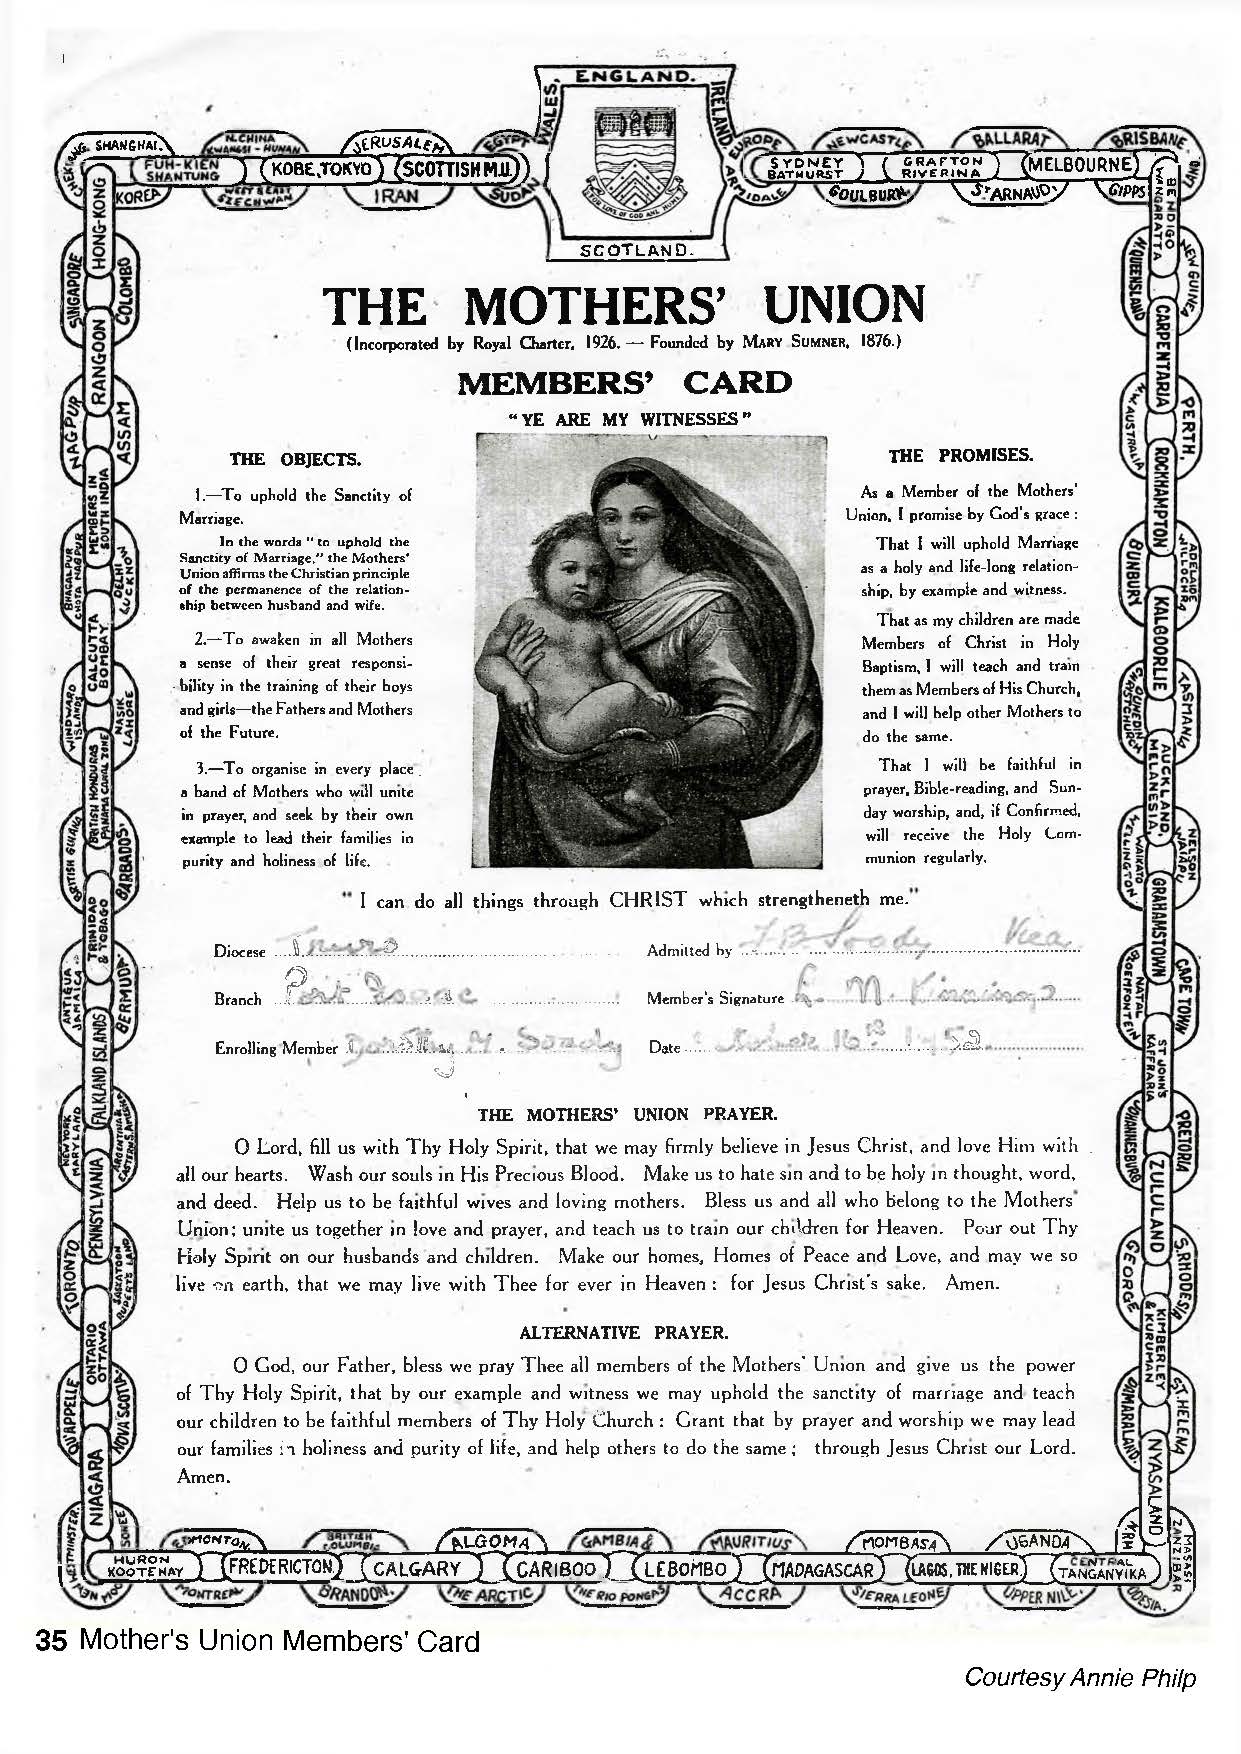 Mothers’ Union card